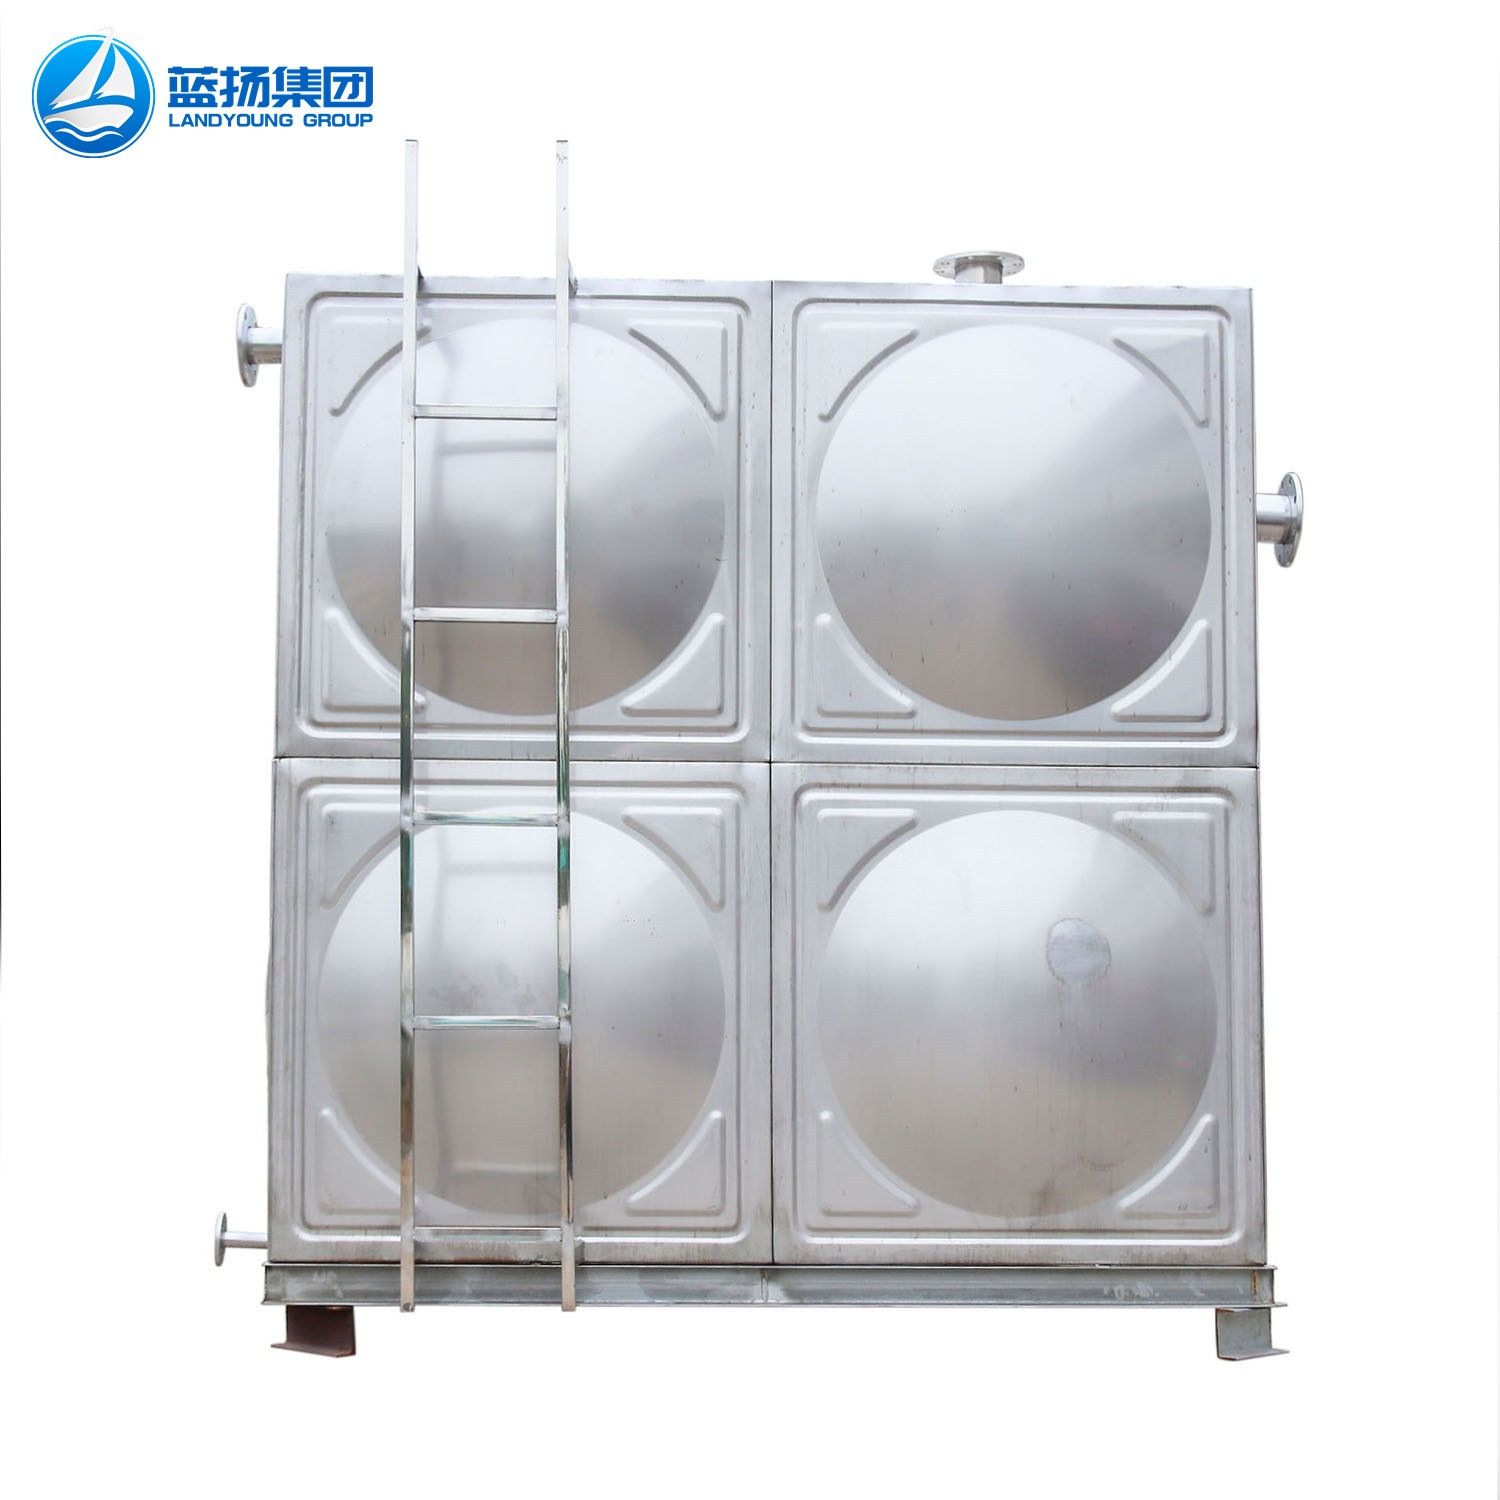 Which is the best for stainless steel water tanks and FRP water tanks?